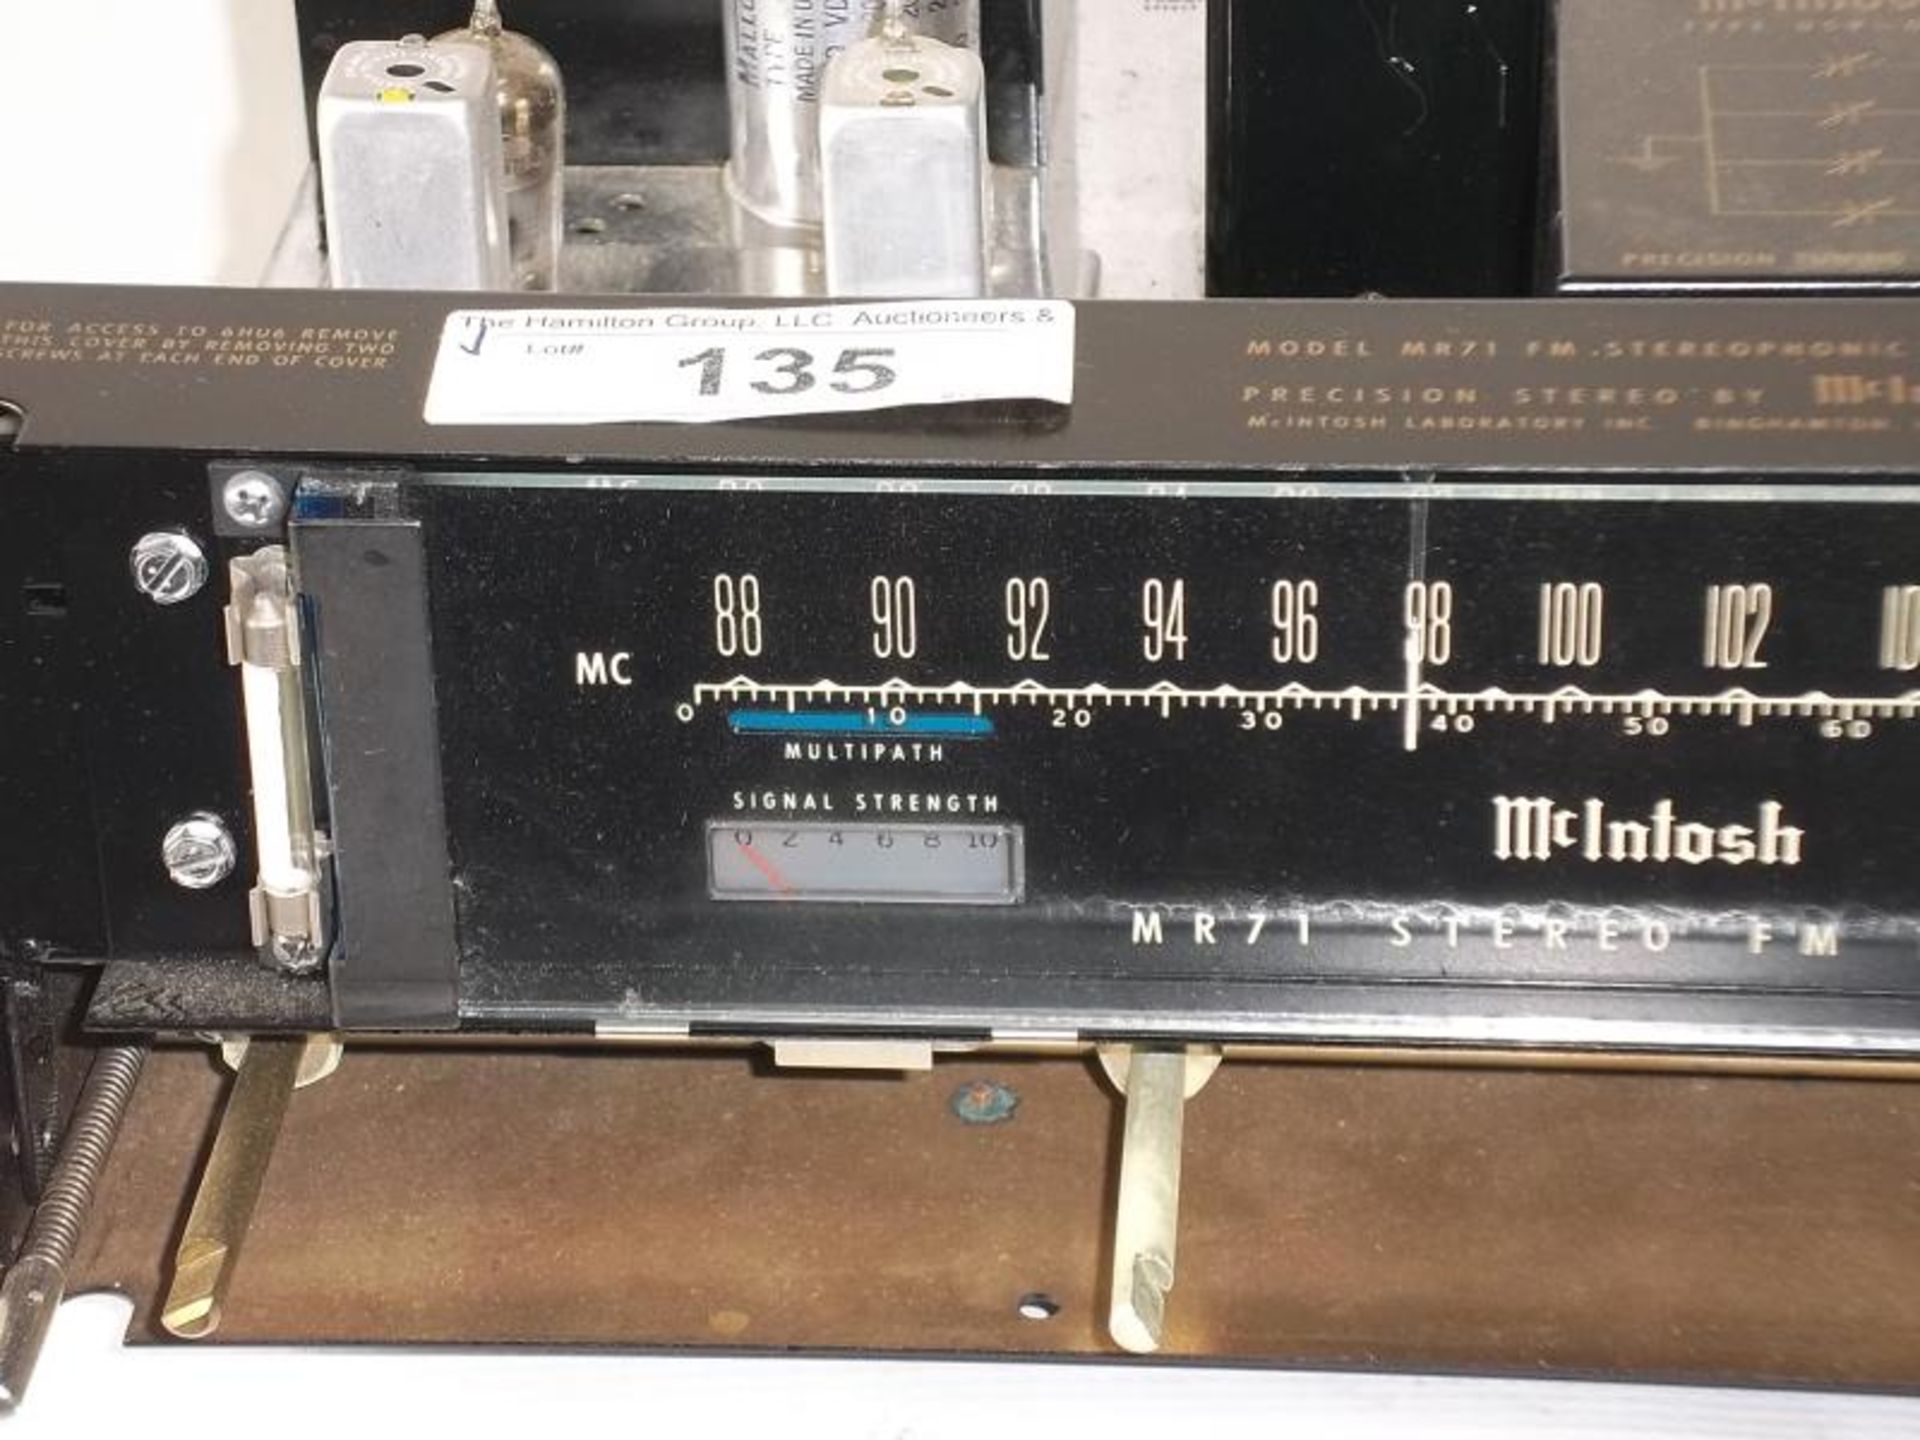 McIntosh MR-71 Stereo FM Tuner, missing knobs and face plates, no case, s # 60B59, tested - powers - Image 3 of 8